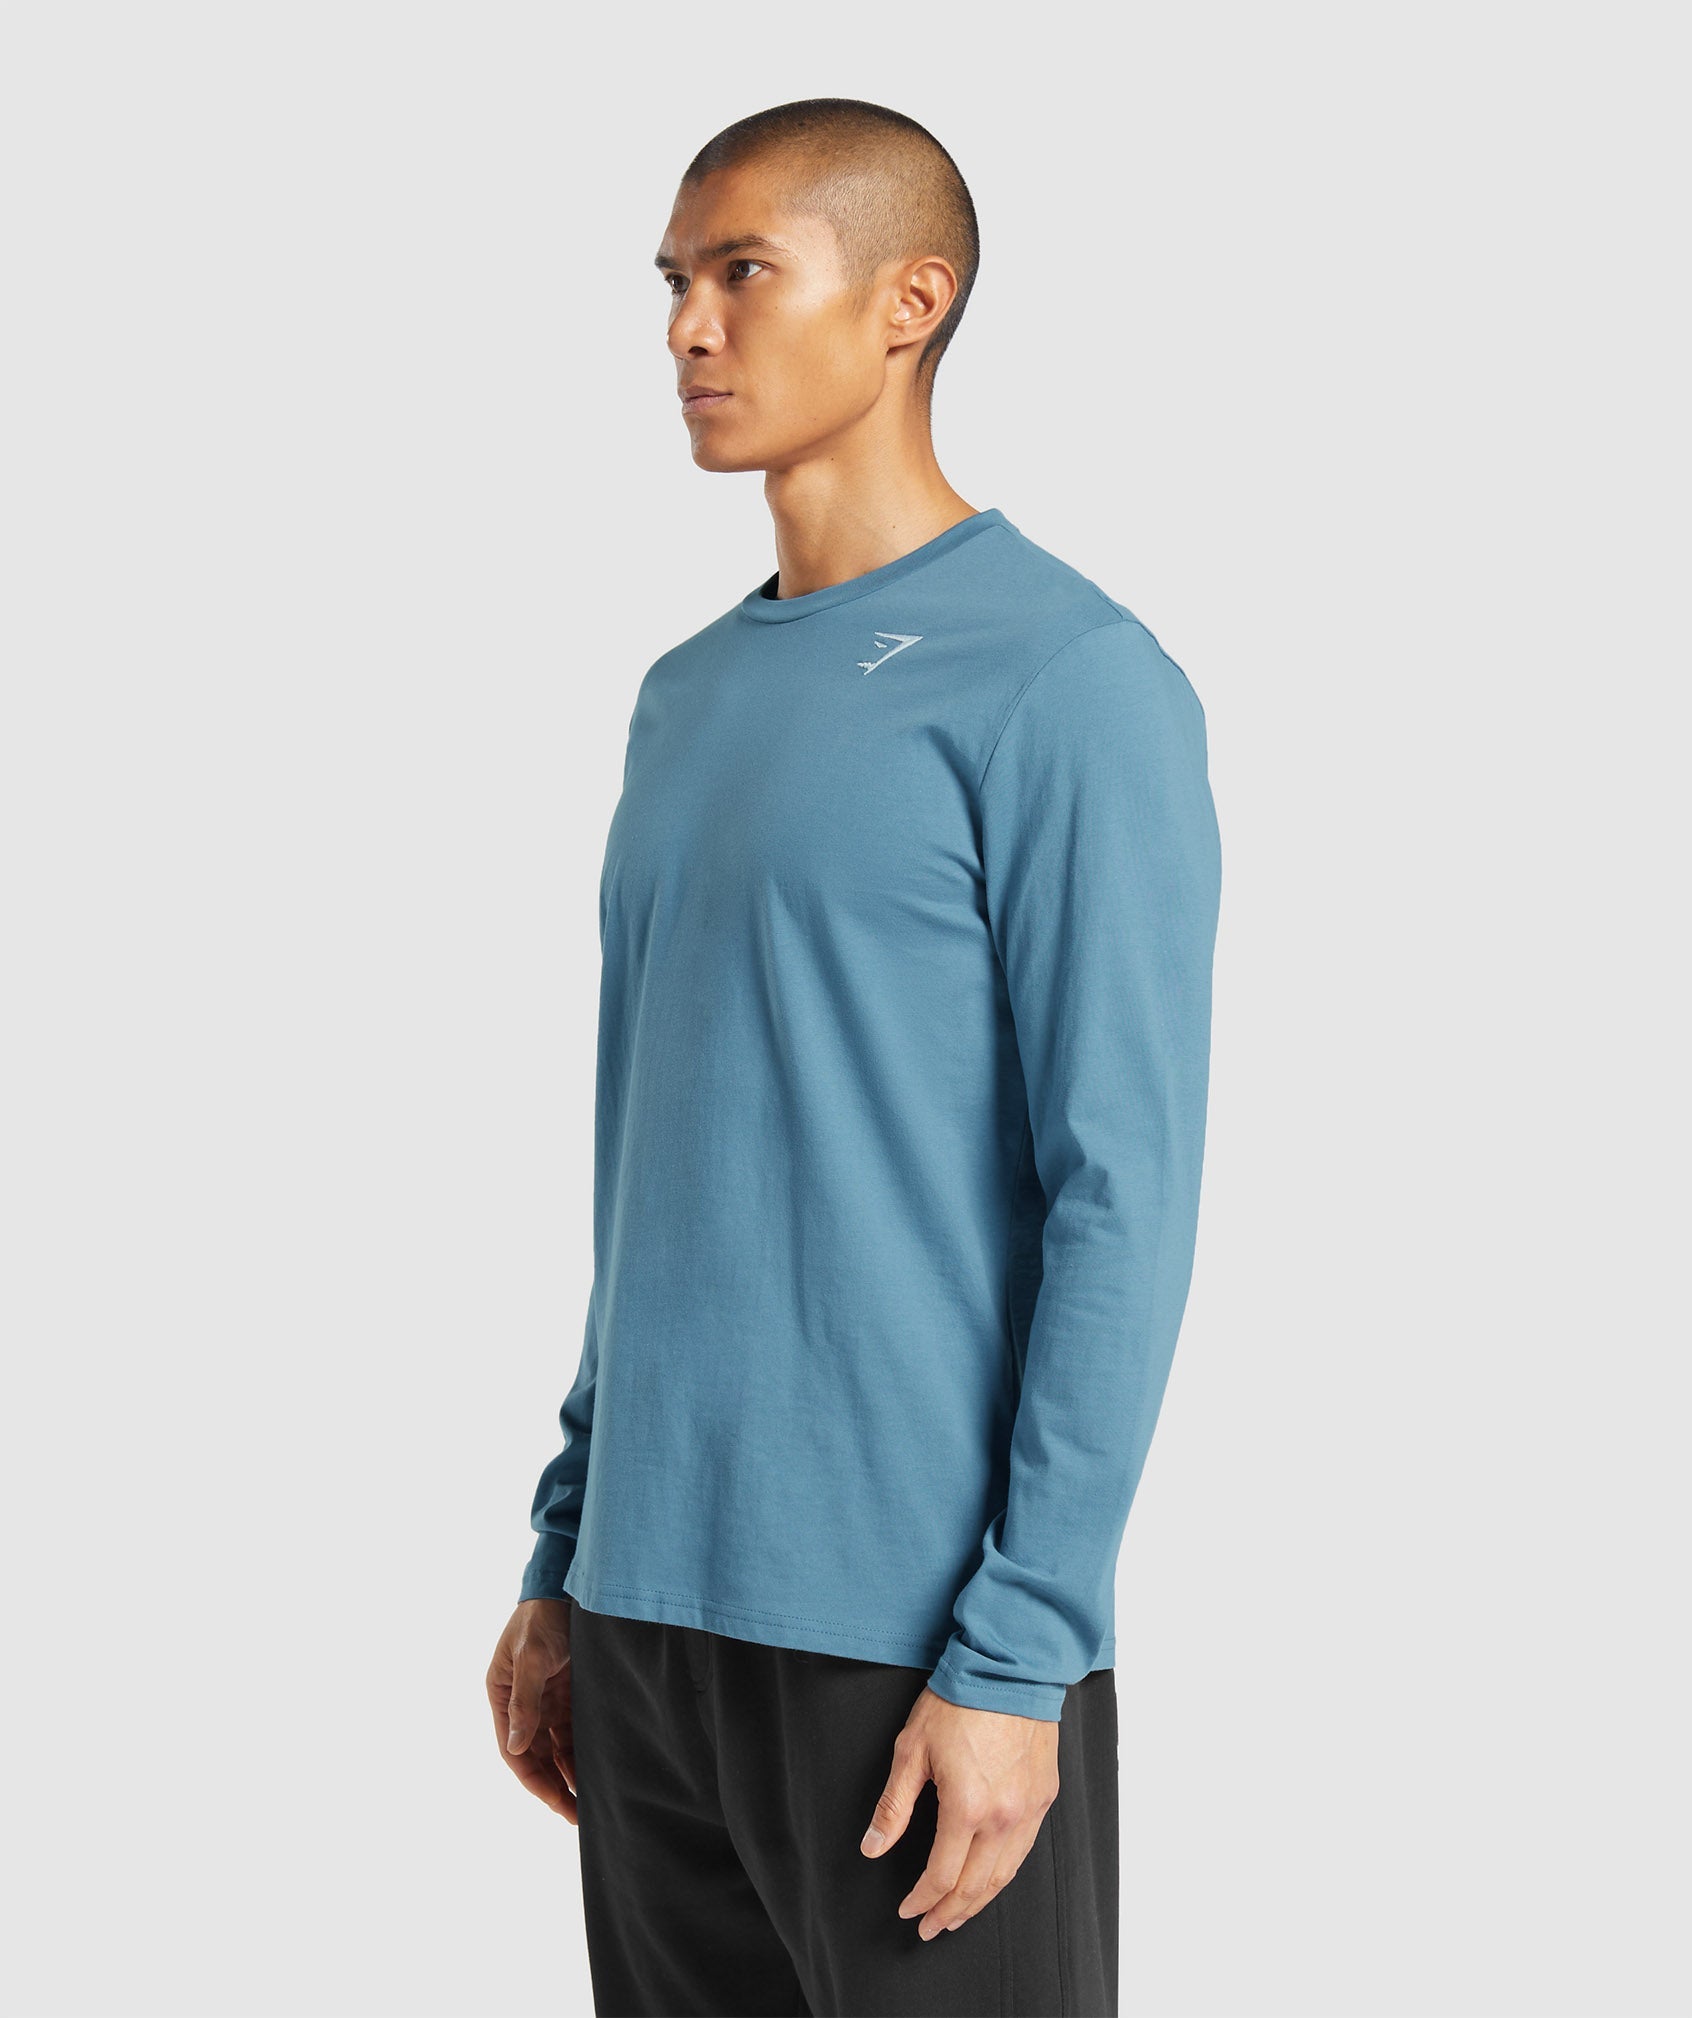 Crest Long Sleeve T-Shirt in Faded Blue - view 3